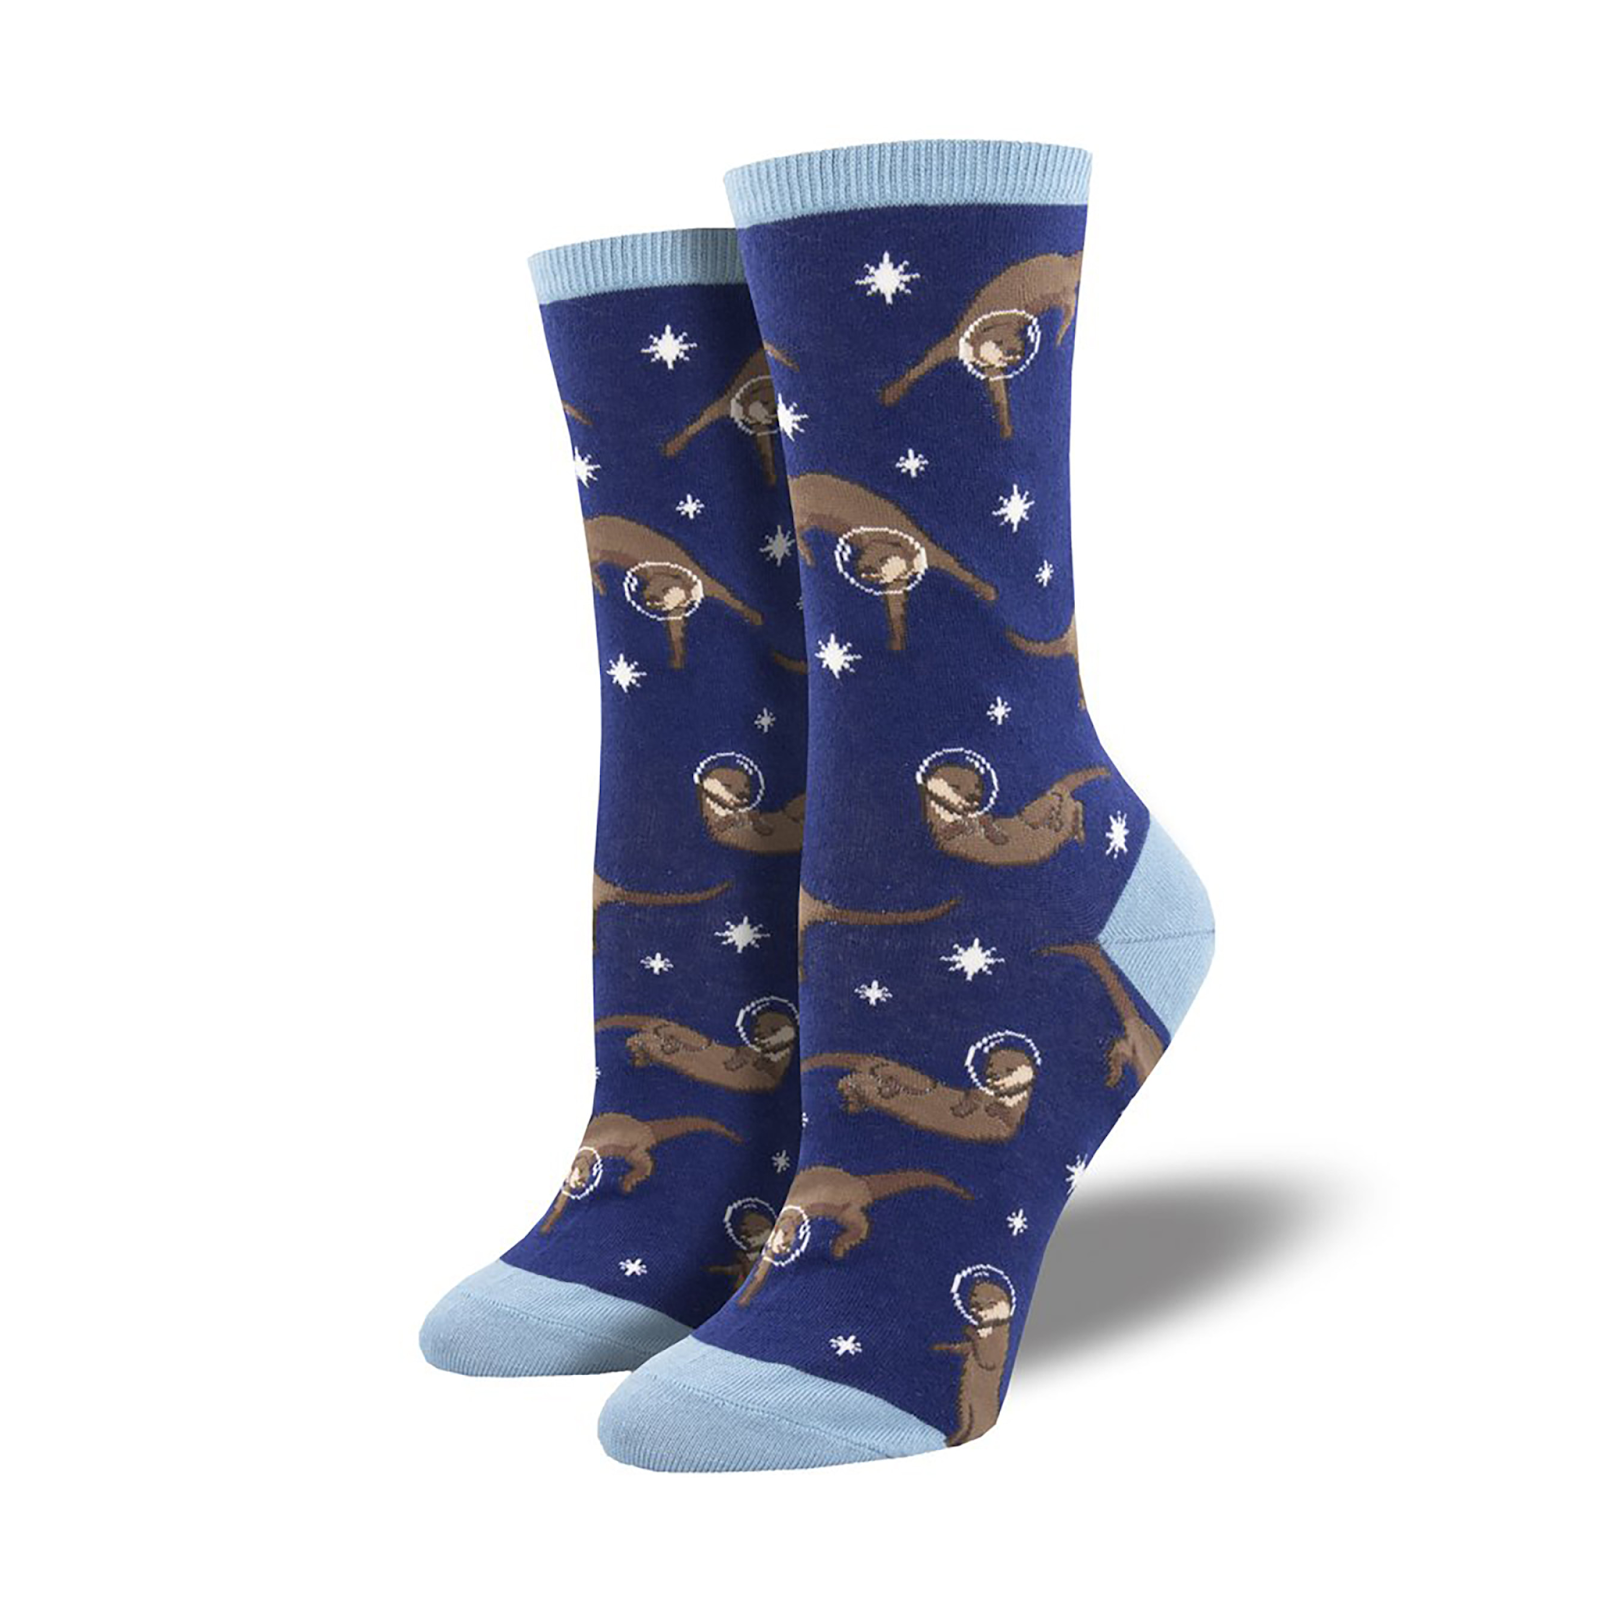 A blue pair of socks with a pattern.